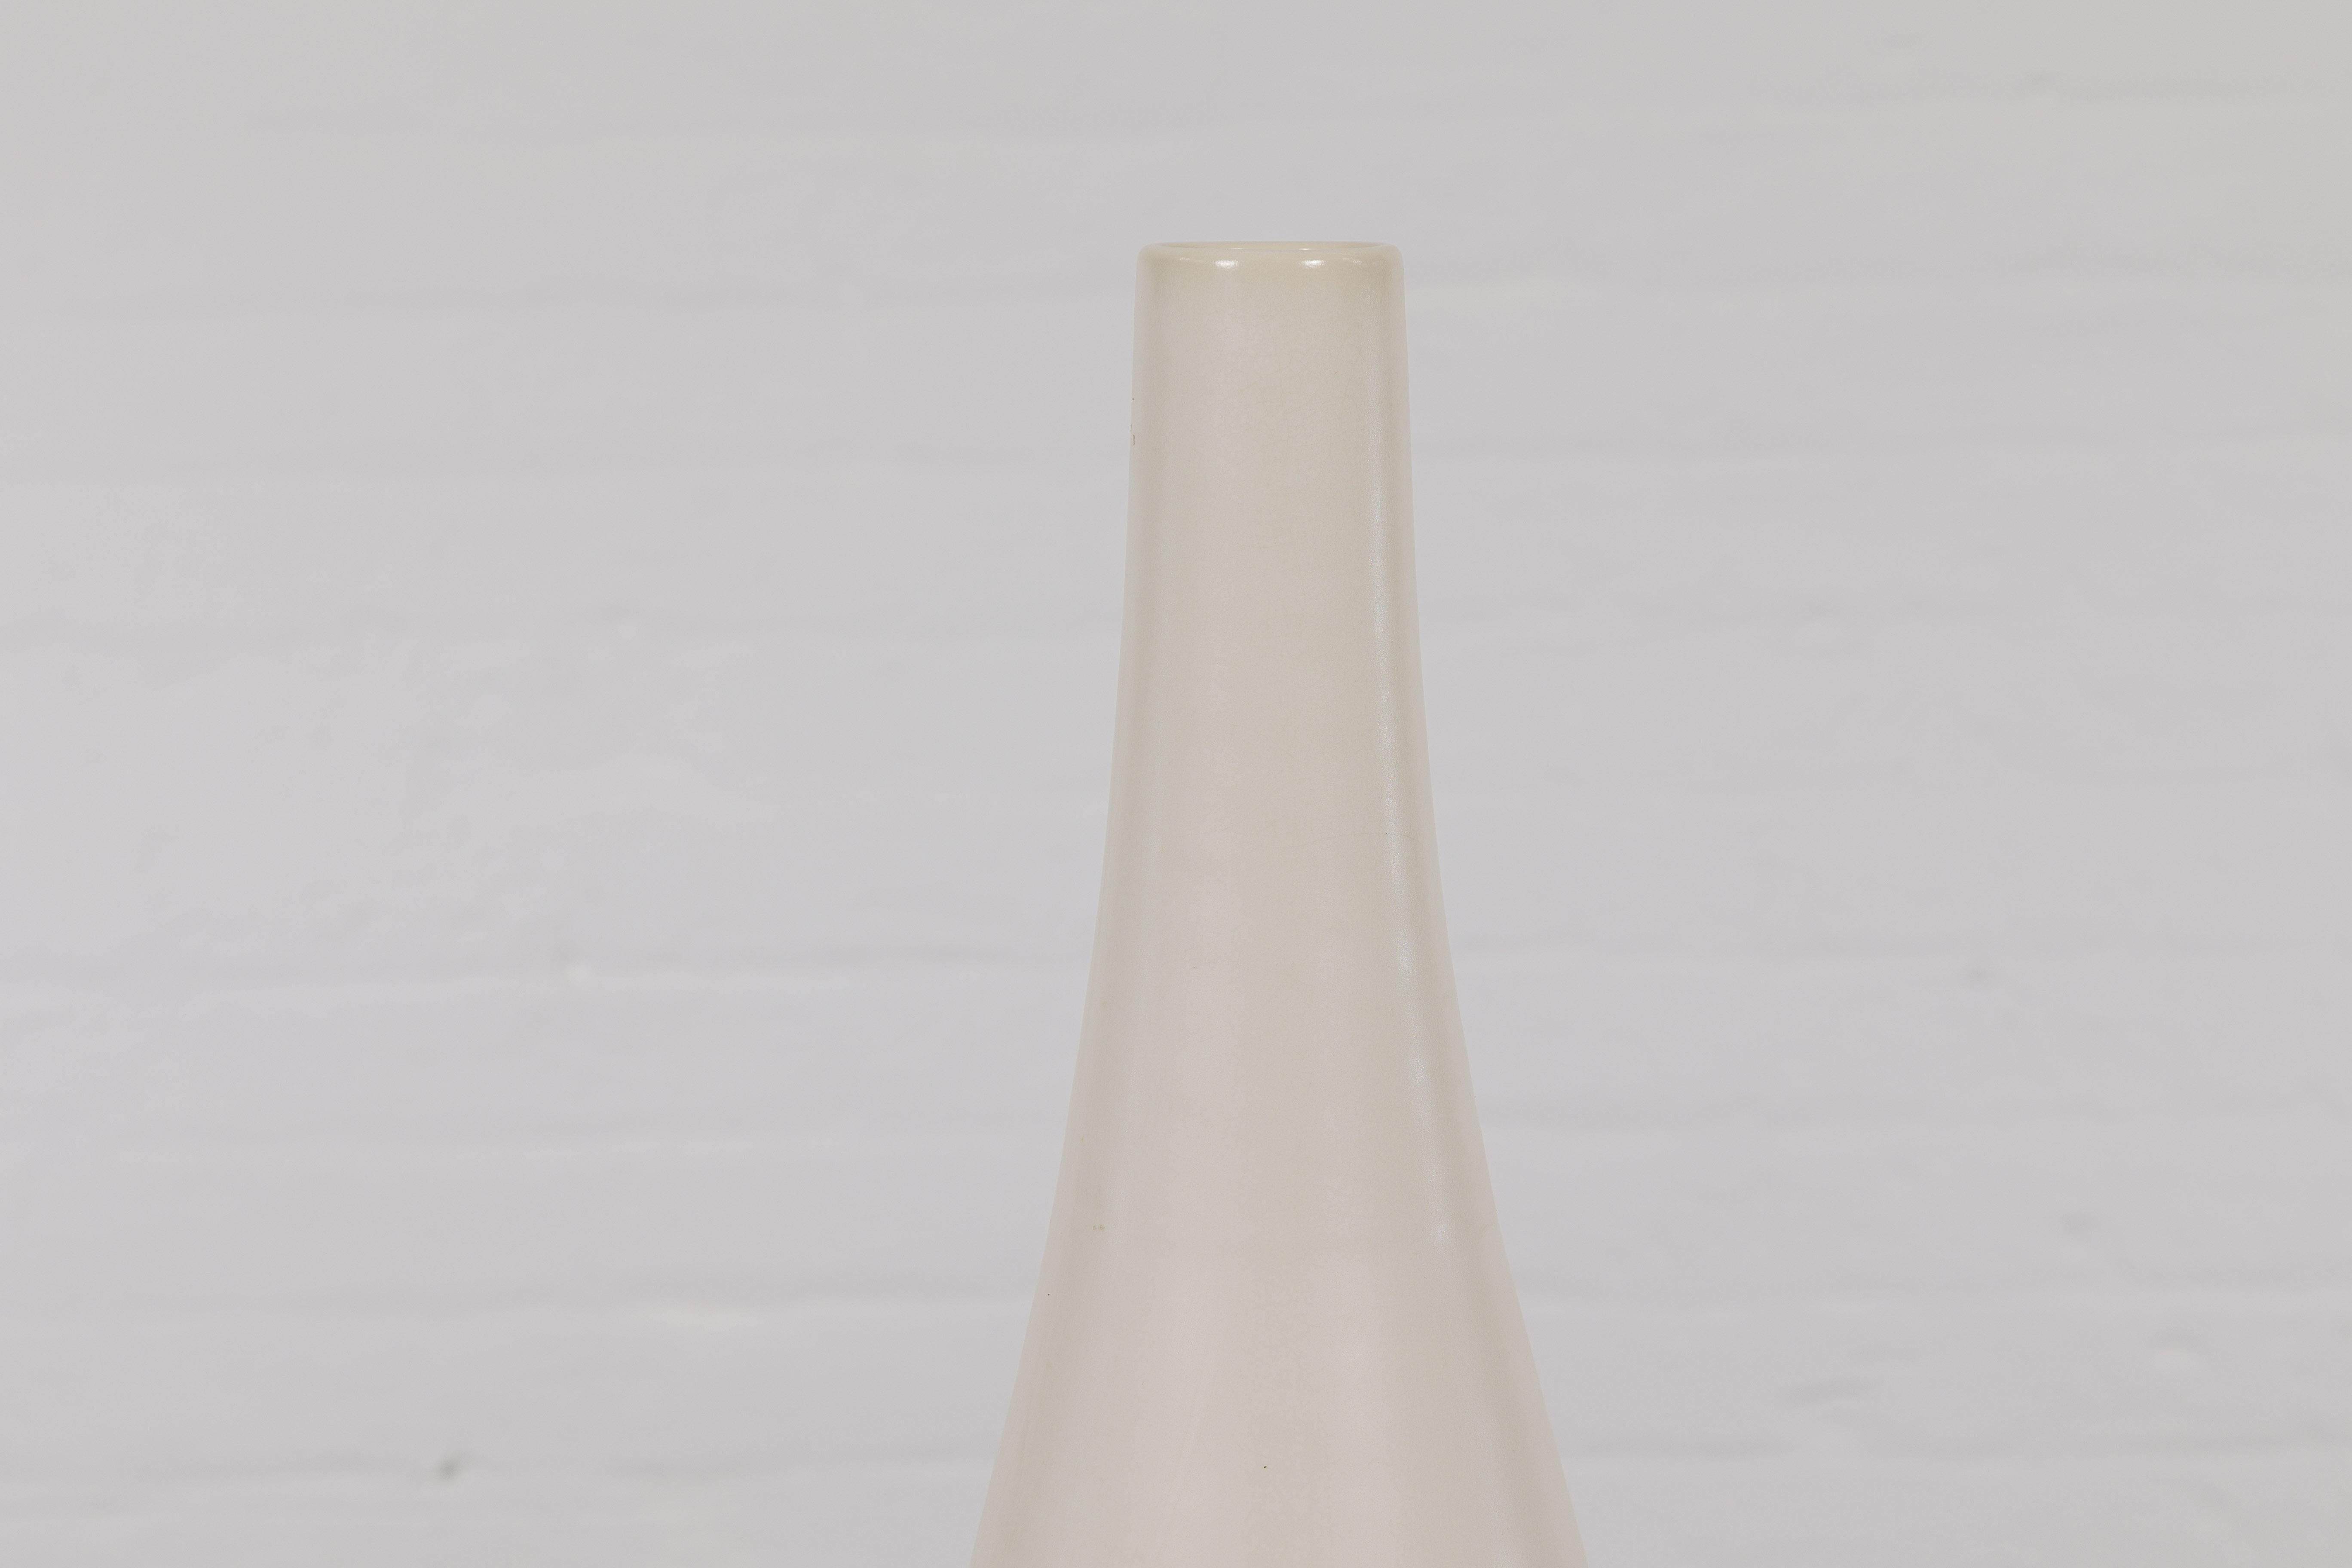 Tall Contemporary Artisan-Made Vase with Cream Glaze and Slender Silhouette In Good Condition For Sale In Yonkers, NY